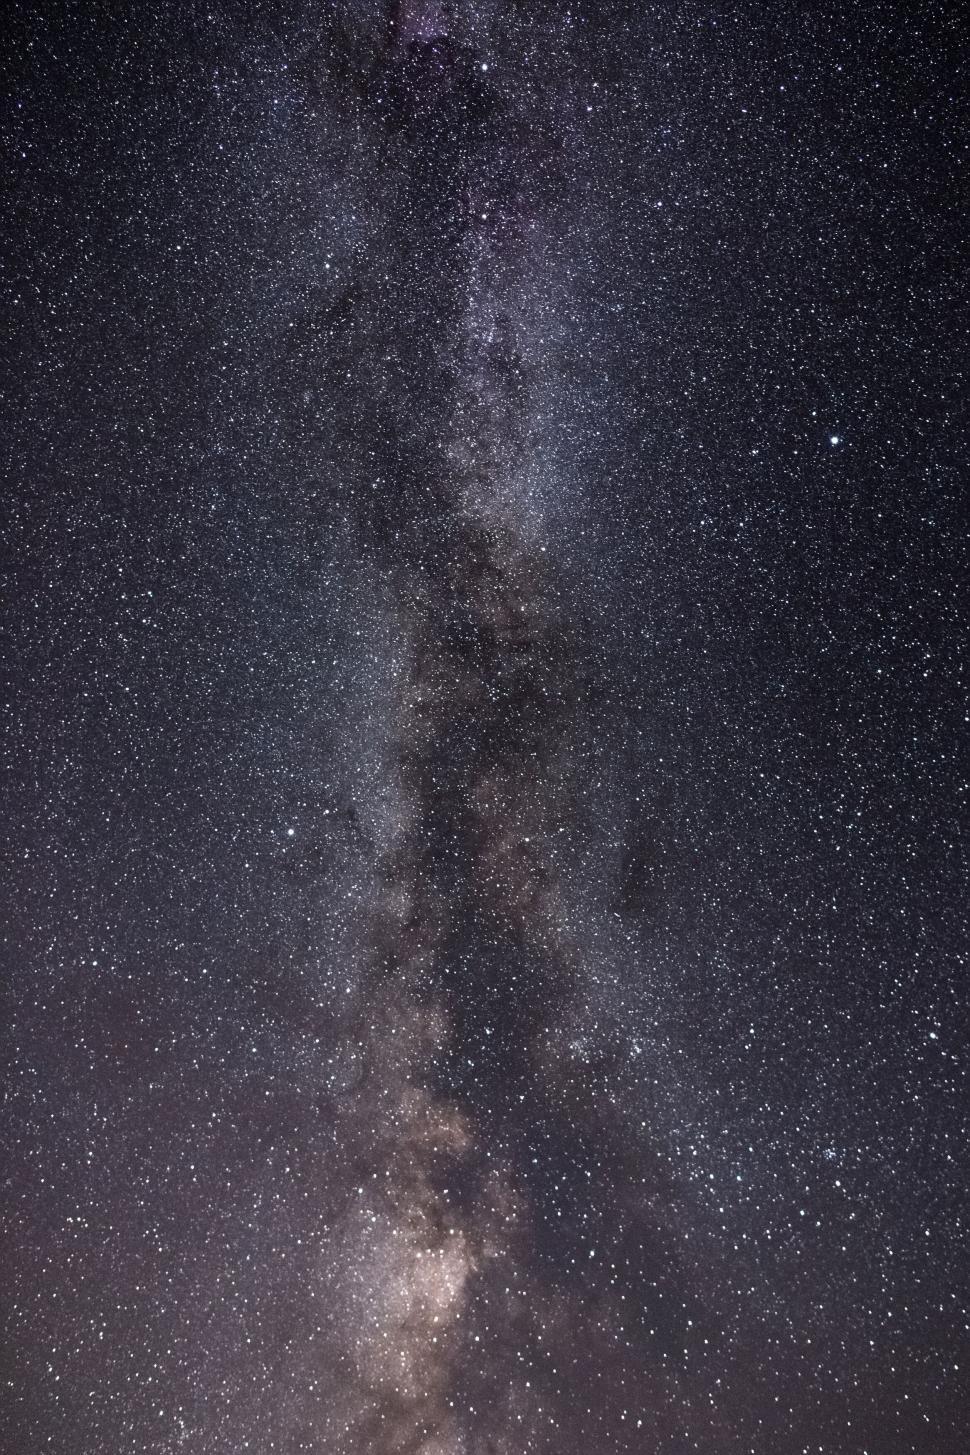 Free Image of Starry sky with visible Milky Way galaxy 